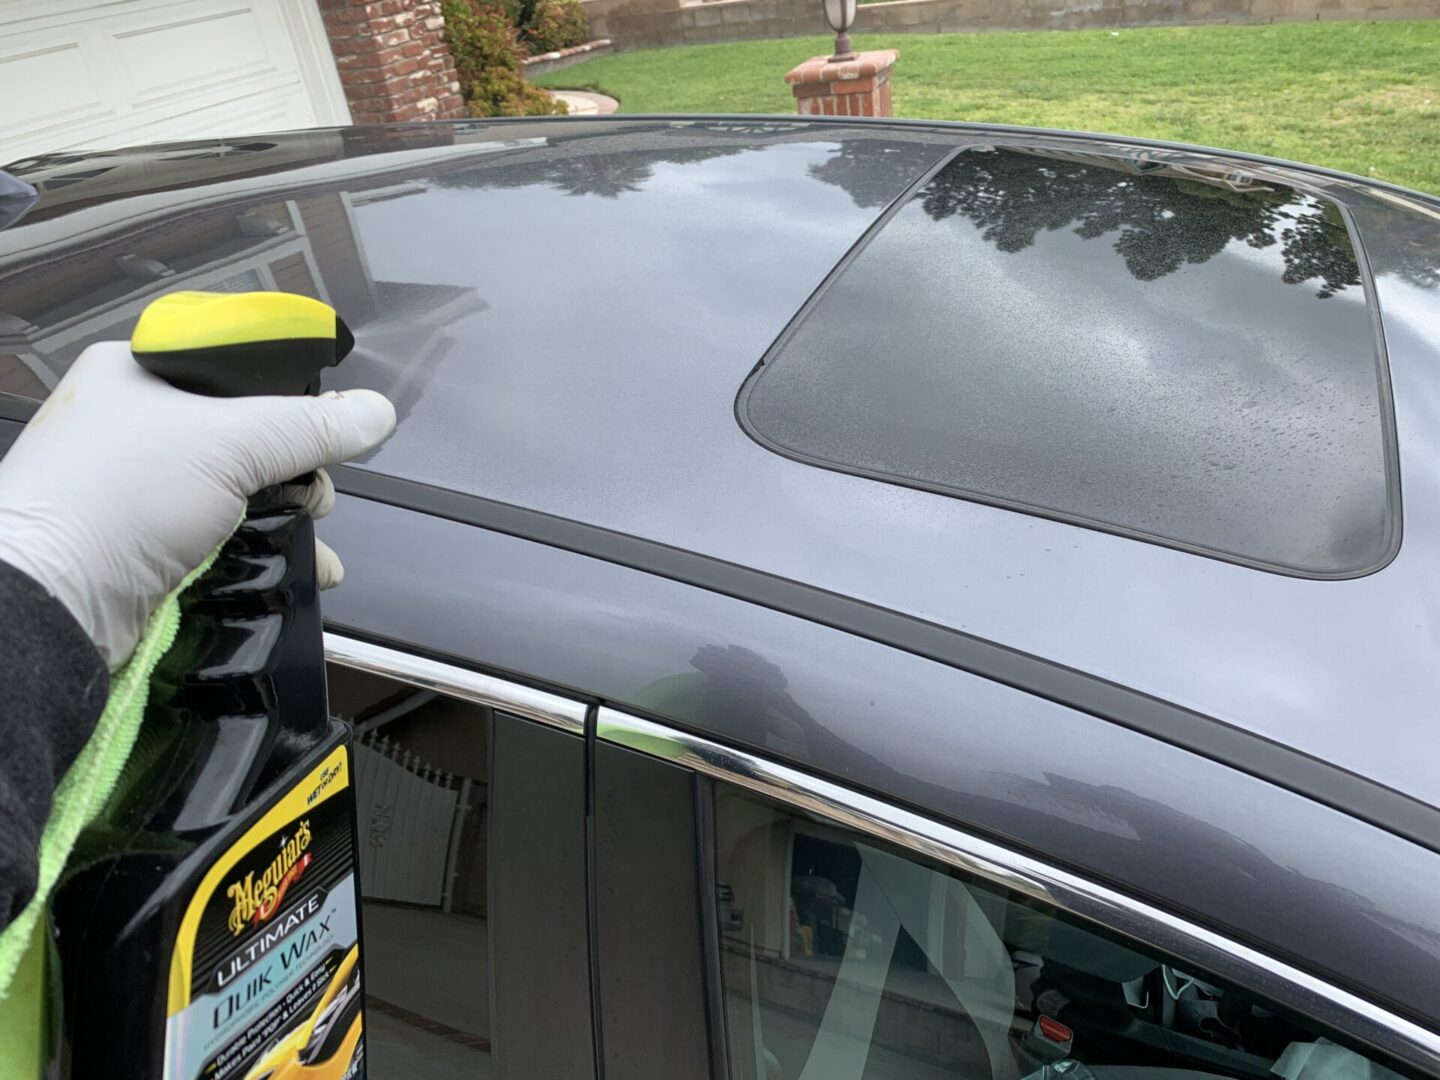 Meguiar's Ultimate Quik Wax Review - The Track Ahead